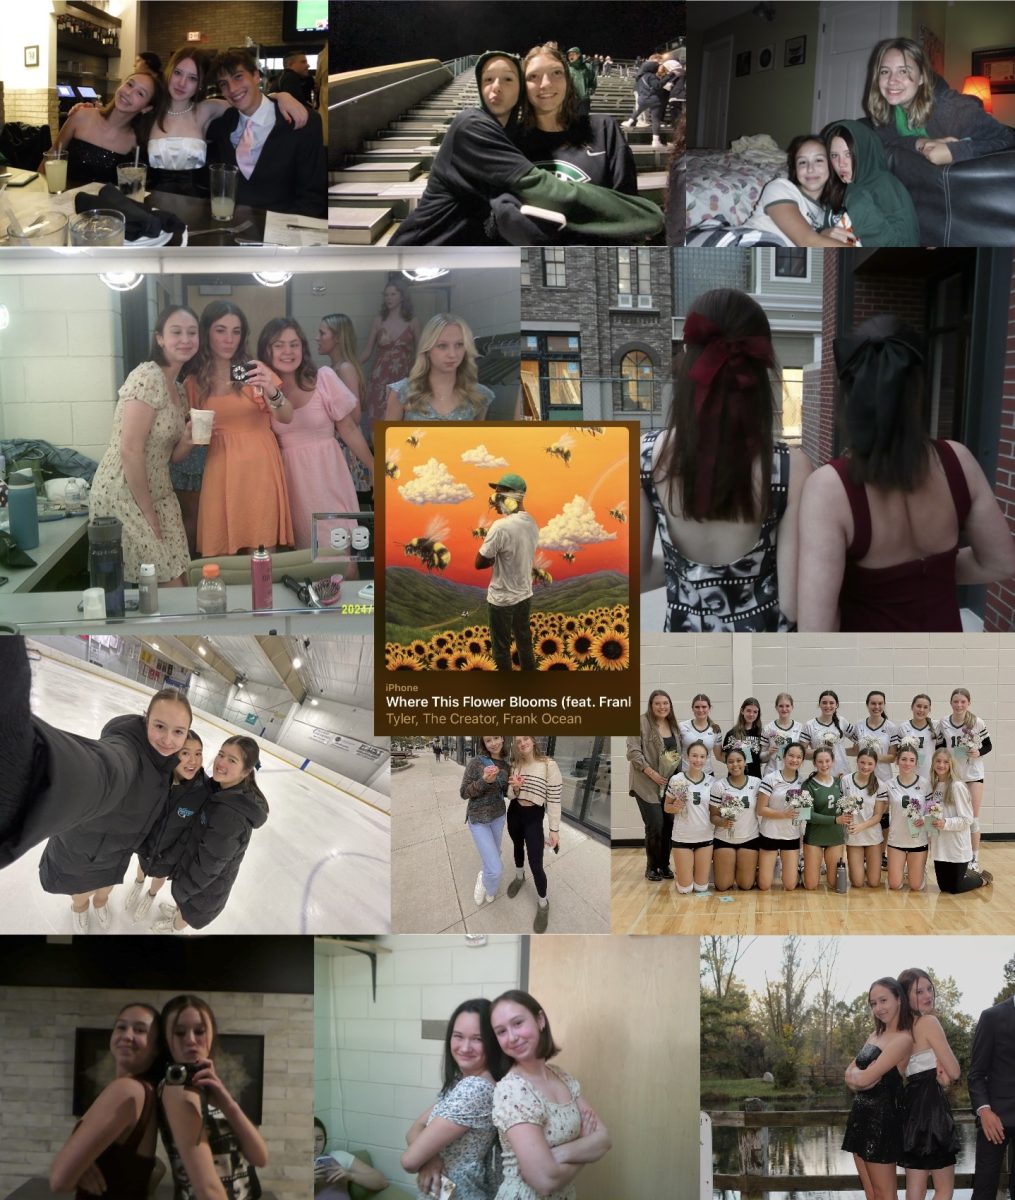 A fraction of my sophomore year highlights, compiled into one collage.